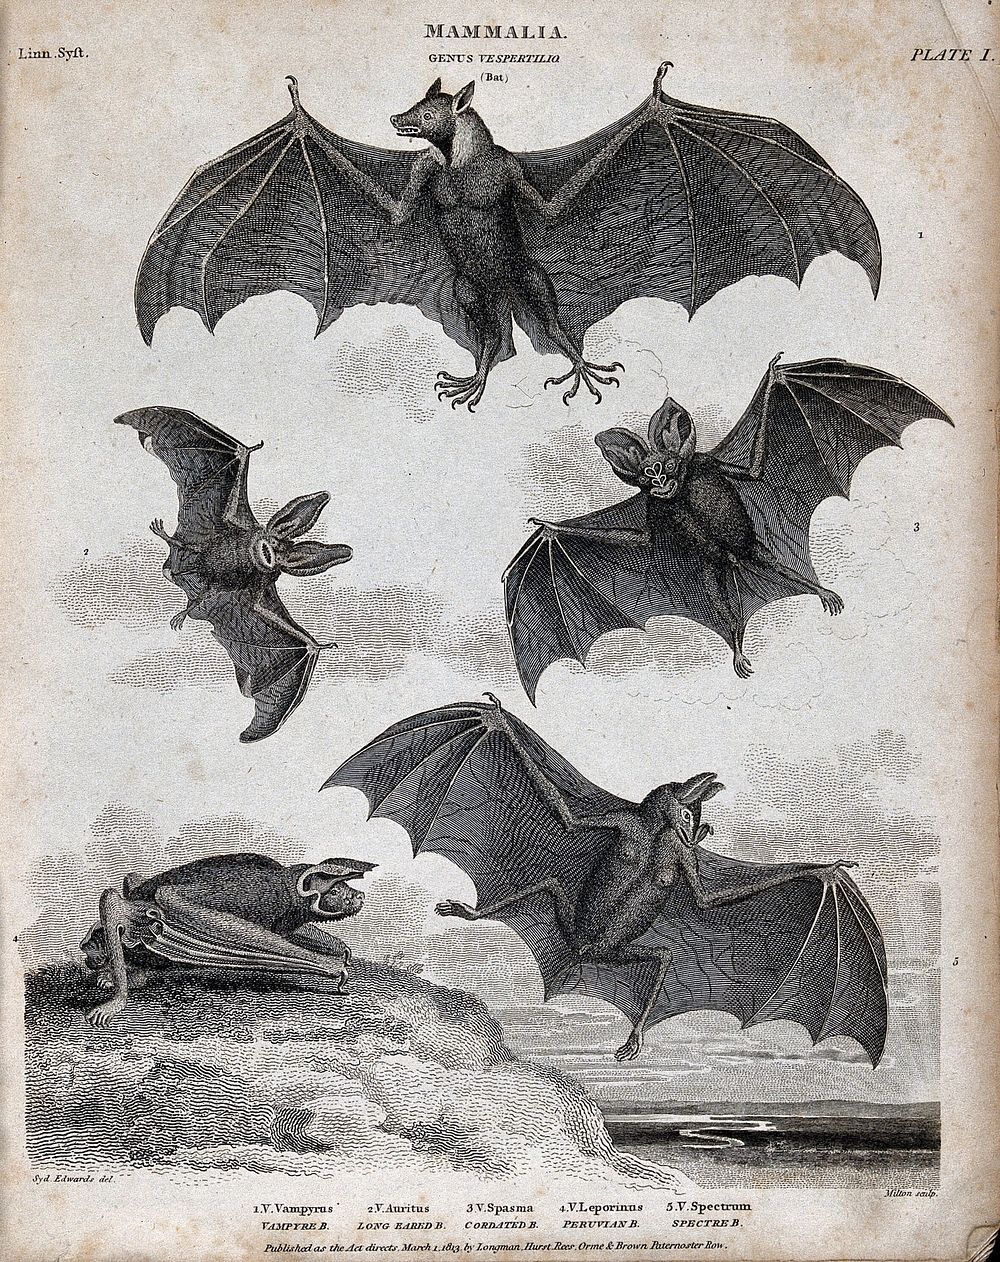 Six nocturnal mammals of the order Chiroptera. Line engraving by Milton after S. Edwards.